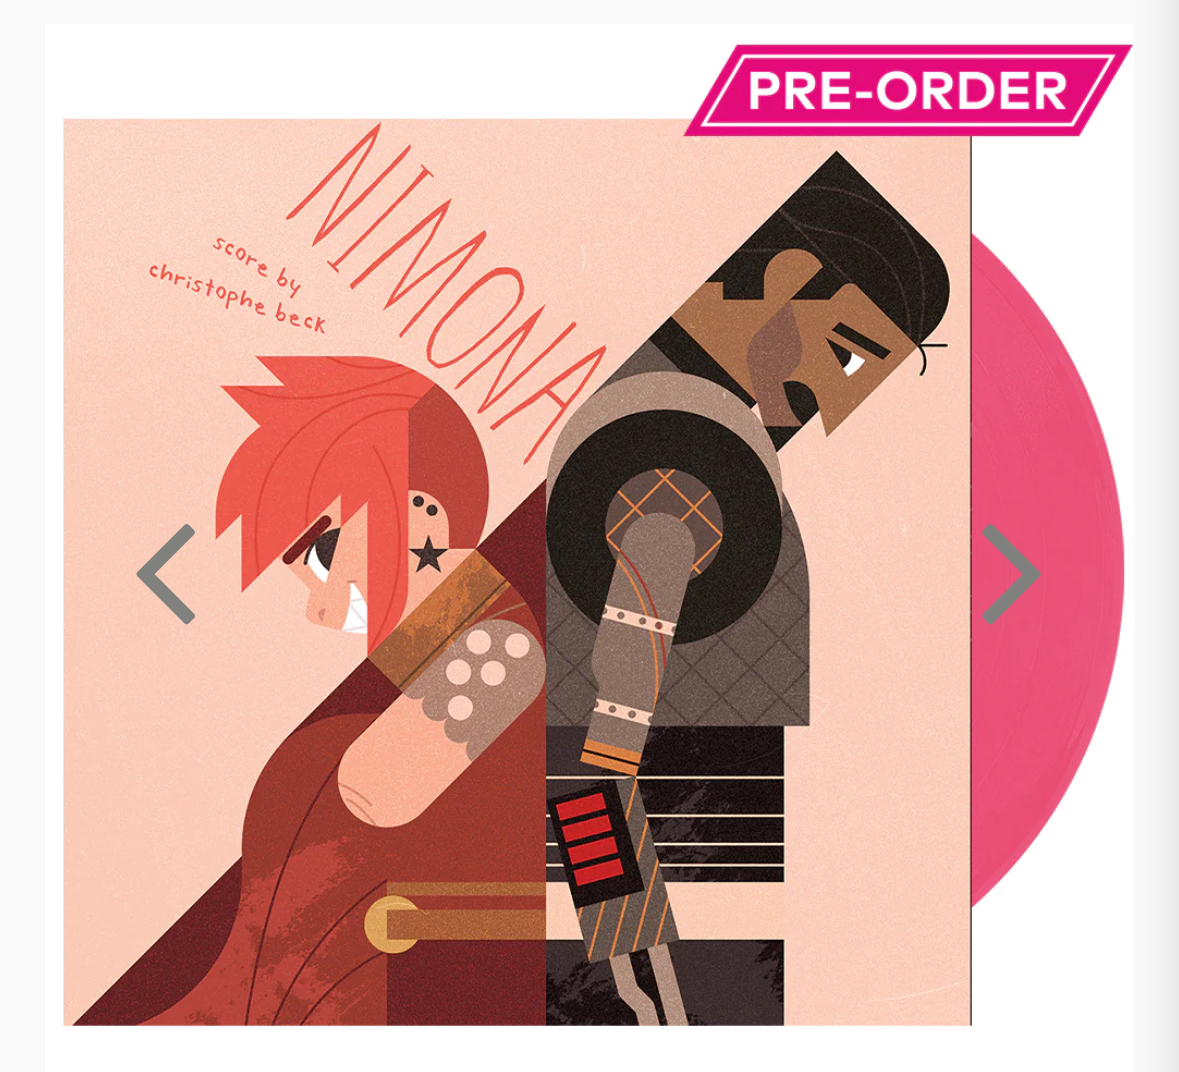 preorder the nimona soundtrack on vinyl! pink colorway very sick iam8bit.com/products/nimon… also if u haven't seen the movie yet WHAT TF ARE U DOING